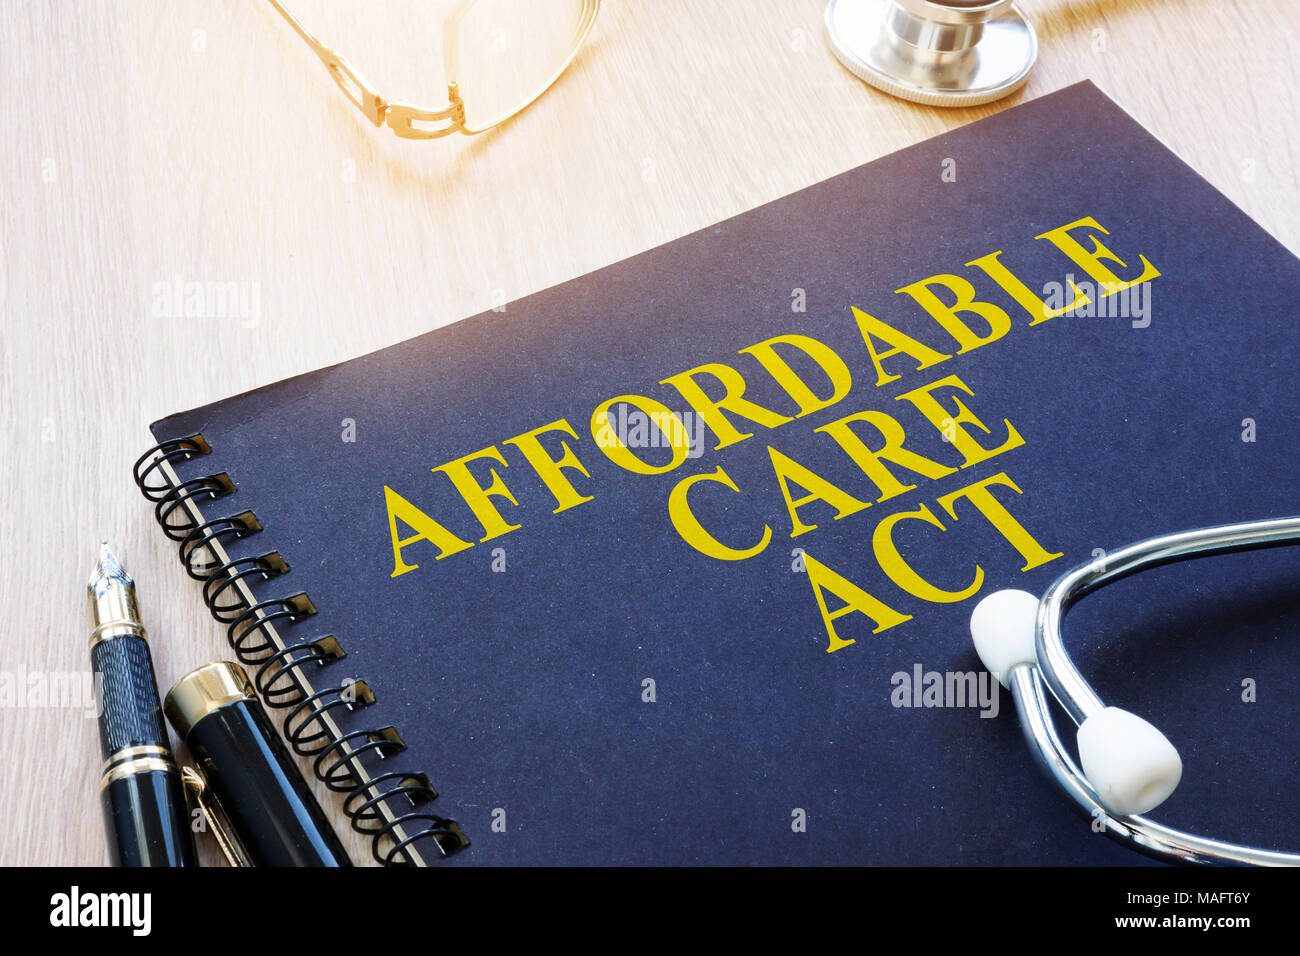 Affordable Care Act ACA and stethoscope on a table. Stock Photo